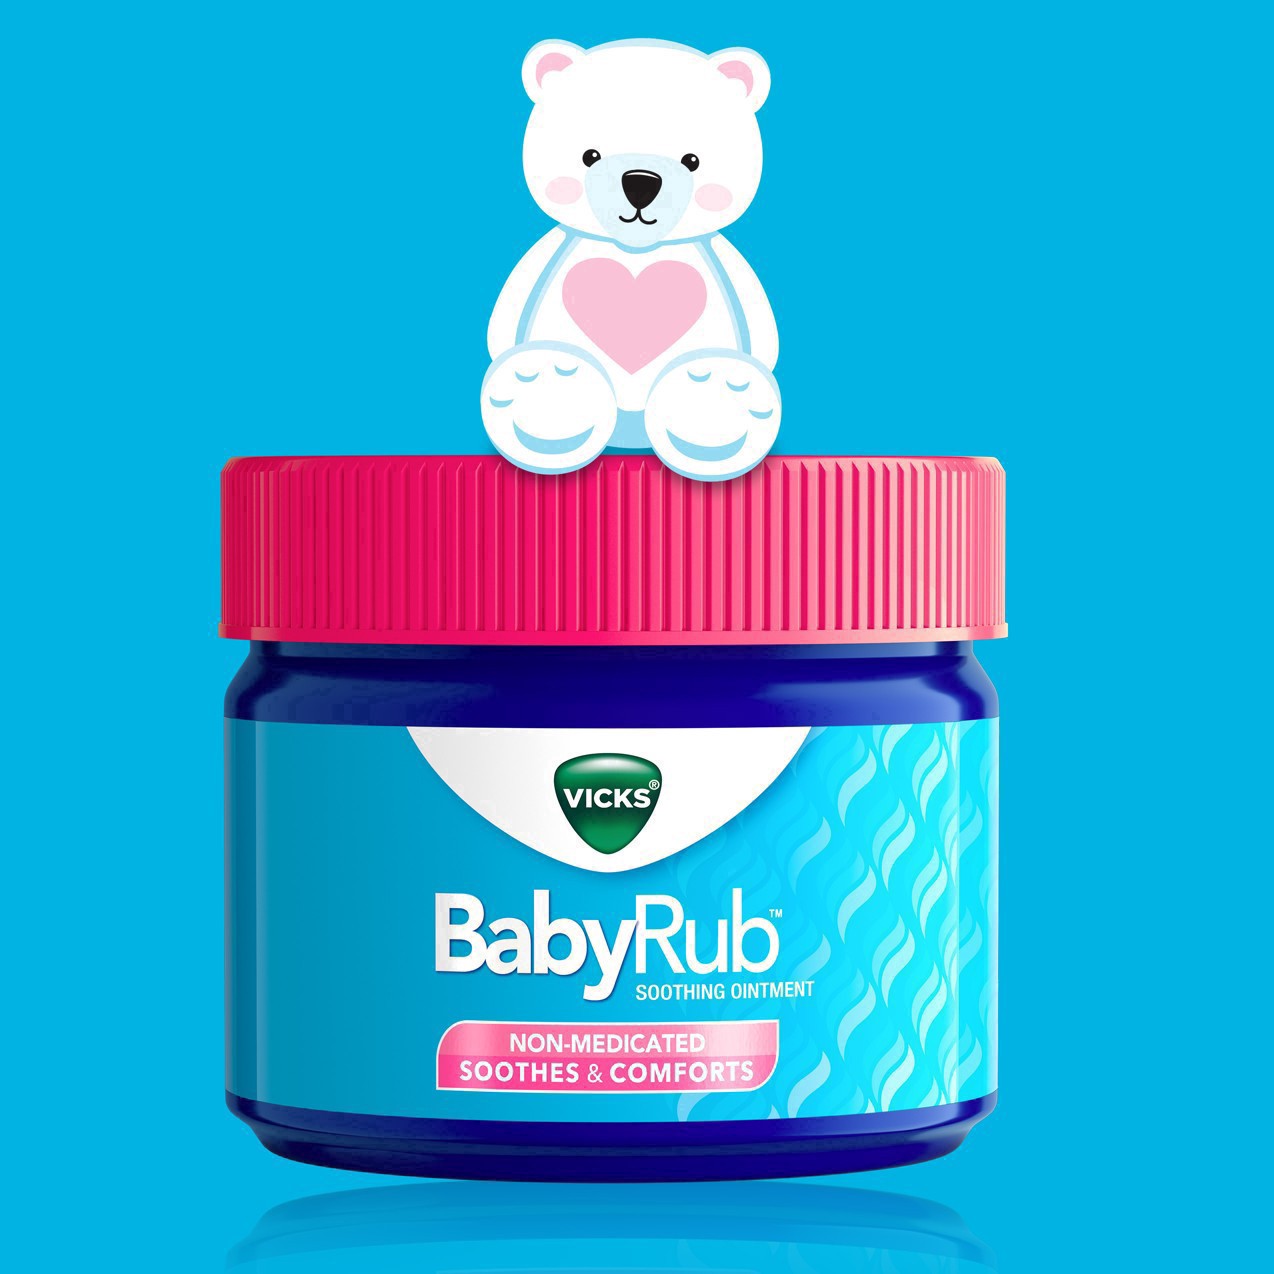 slide 12 of 78, Vicks BabyRub, Chest Rub Ointment with Soothing Aloe, Eucalyptus, Lavender, and Rosemary, from The Makers of VapoRub, 1.76 oz, 1.76 oz